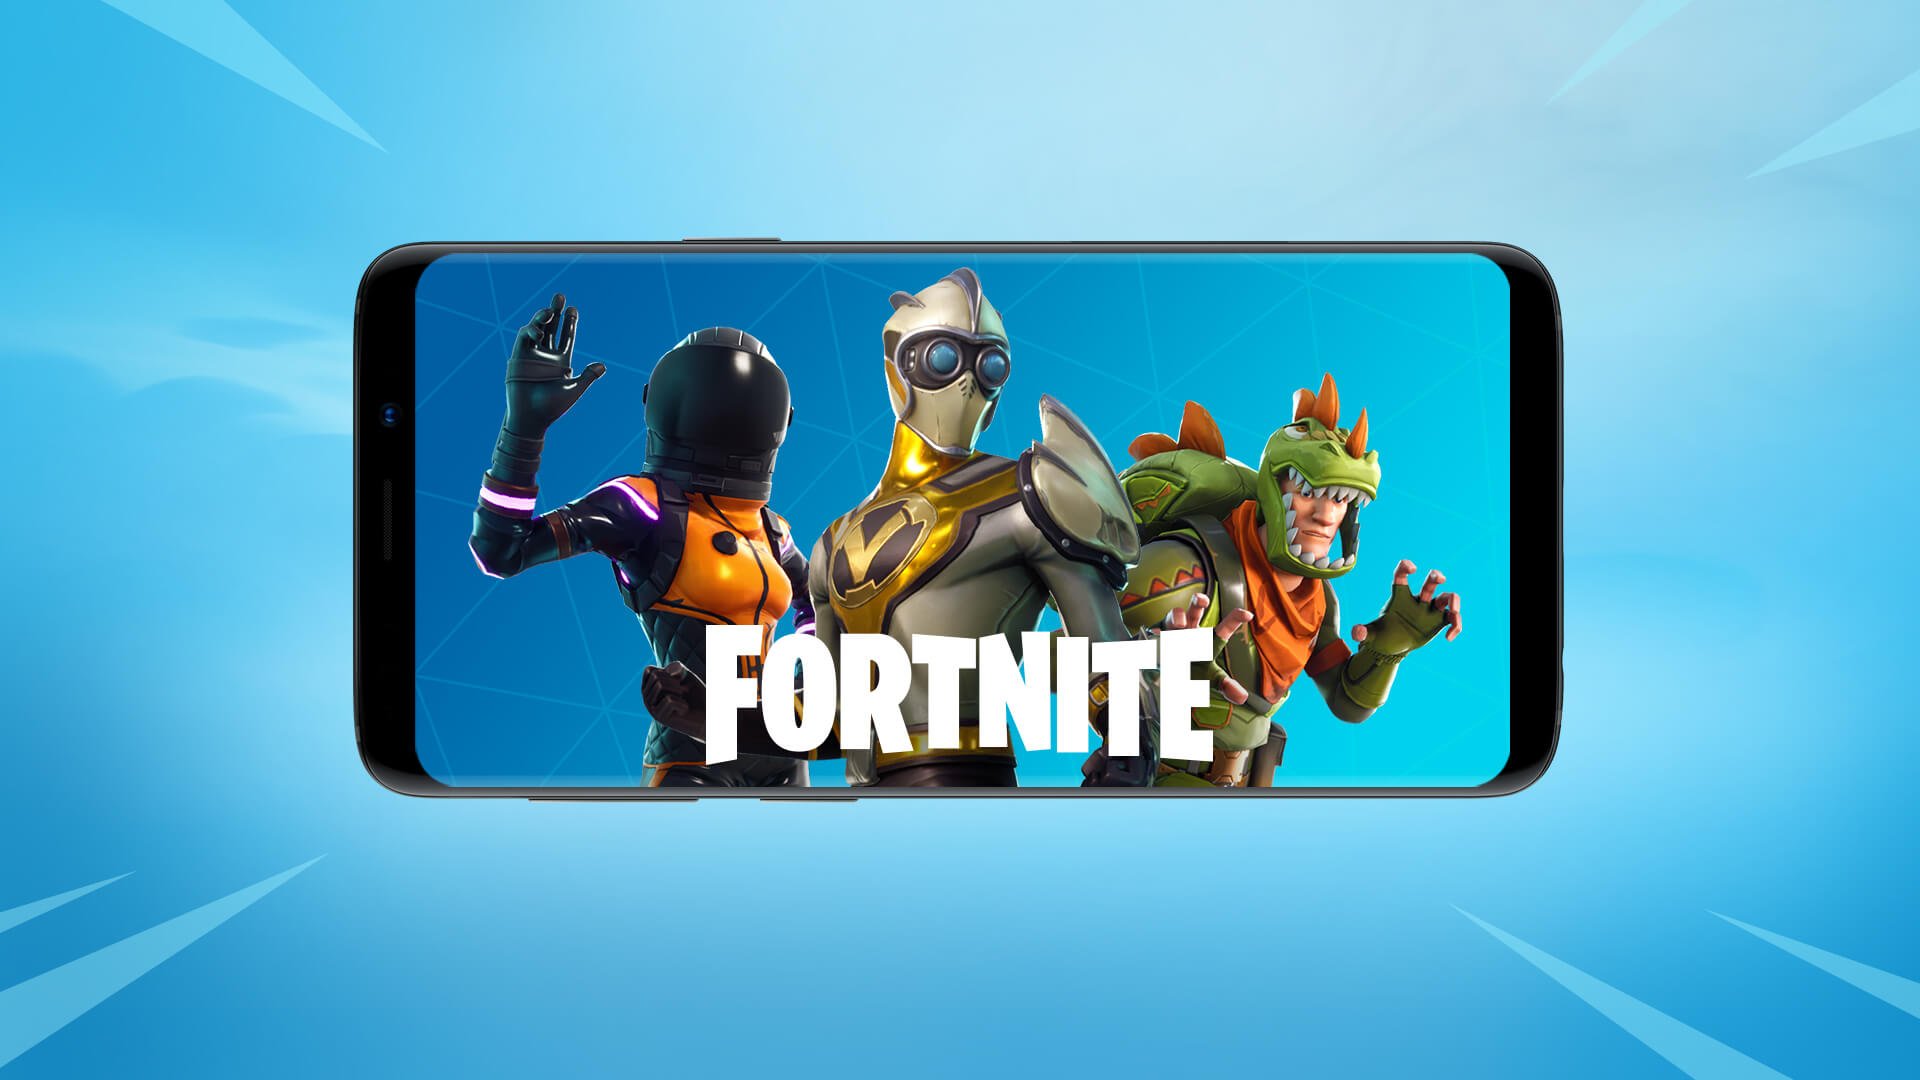 Fortnite Android Ios Crossplay How To Crossplay Fortnite On Mobile With Other Platforms